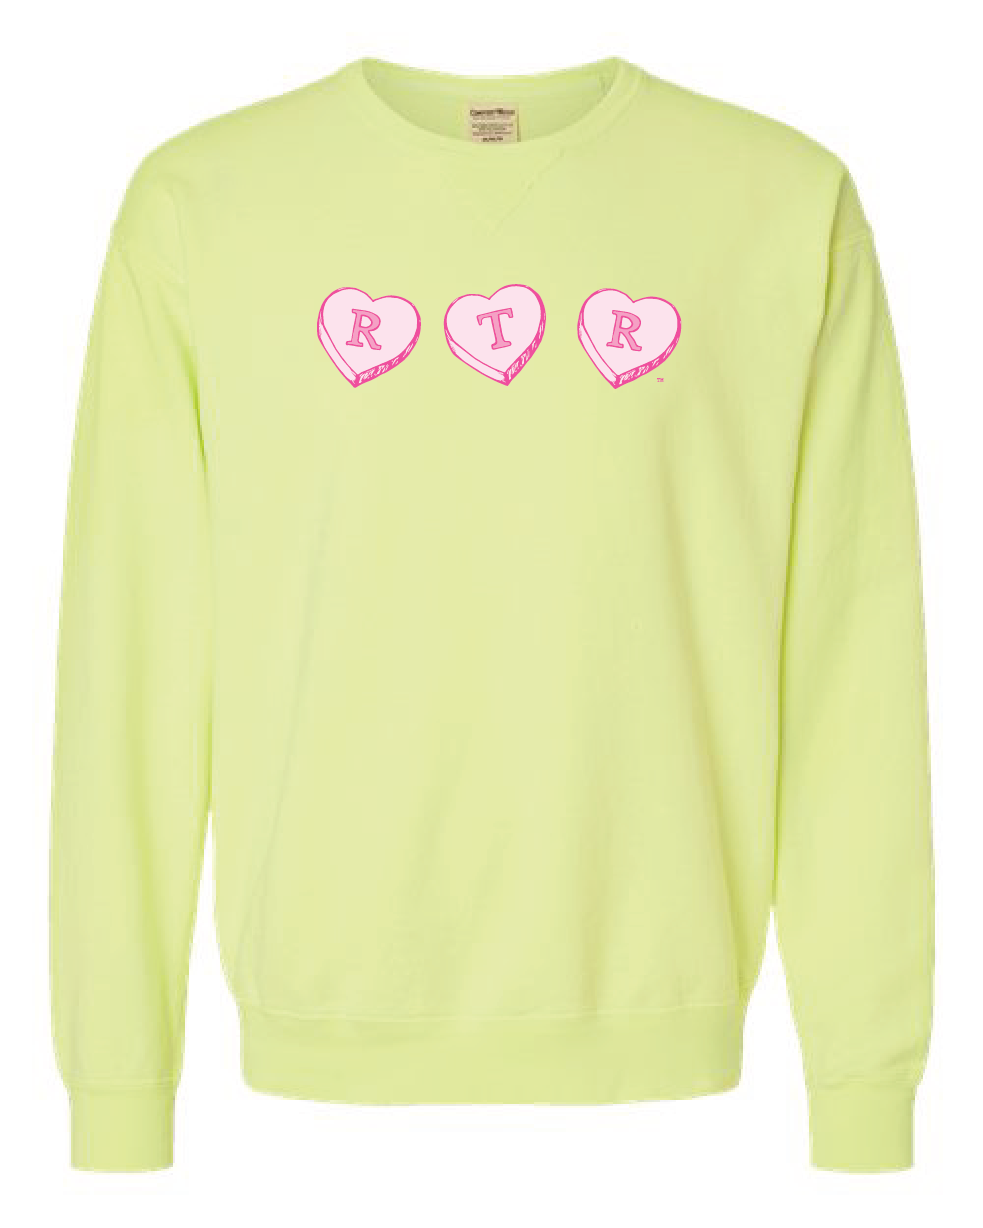 RTR candy hearts top